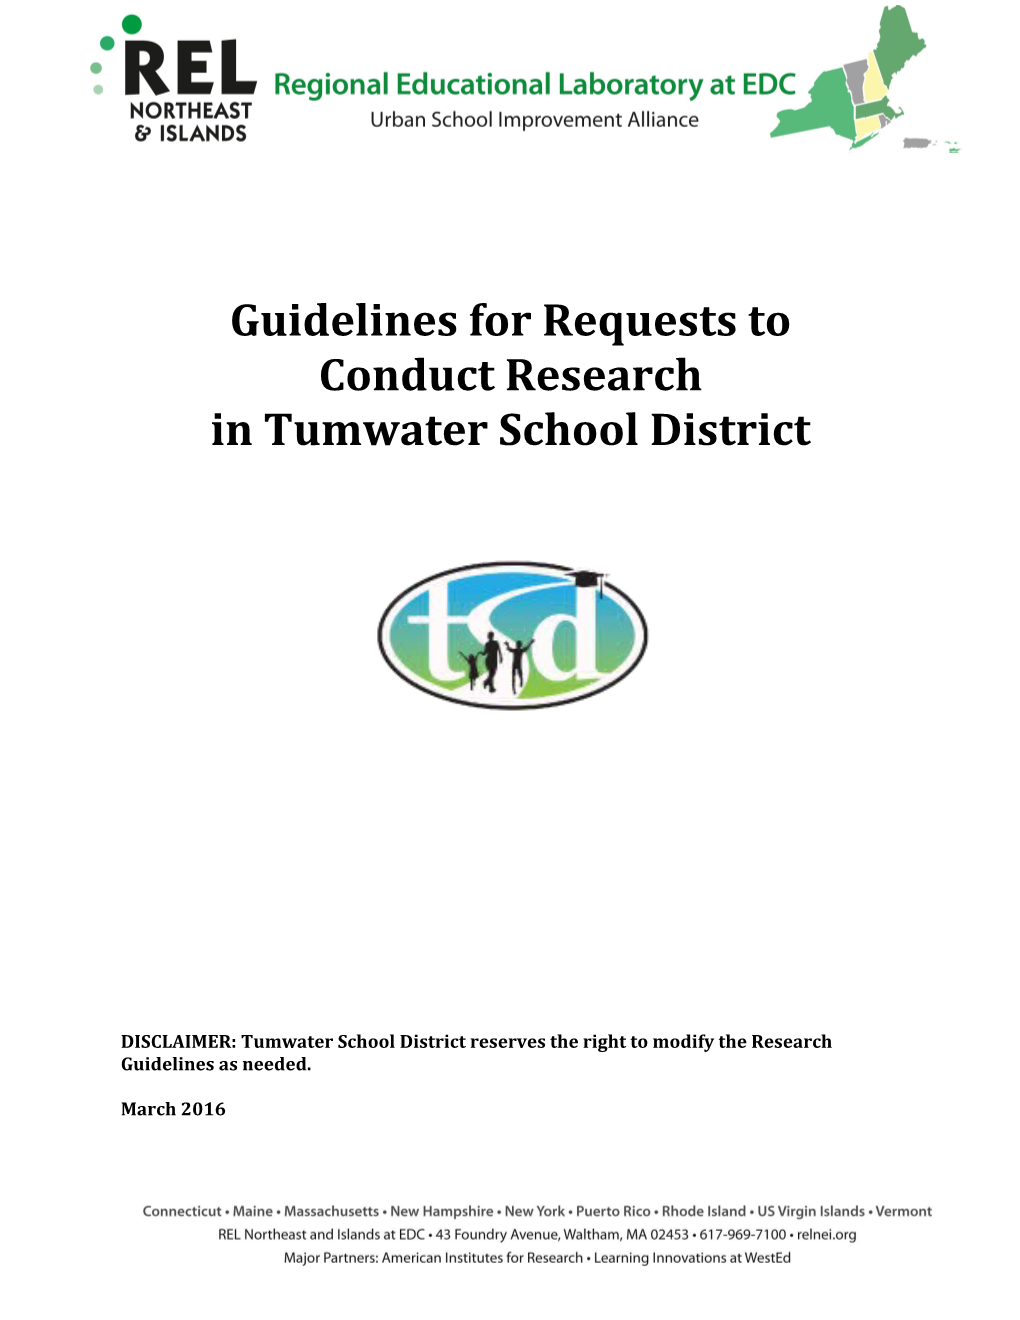 Guidelines for Requests To